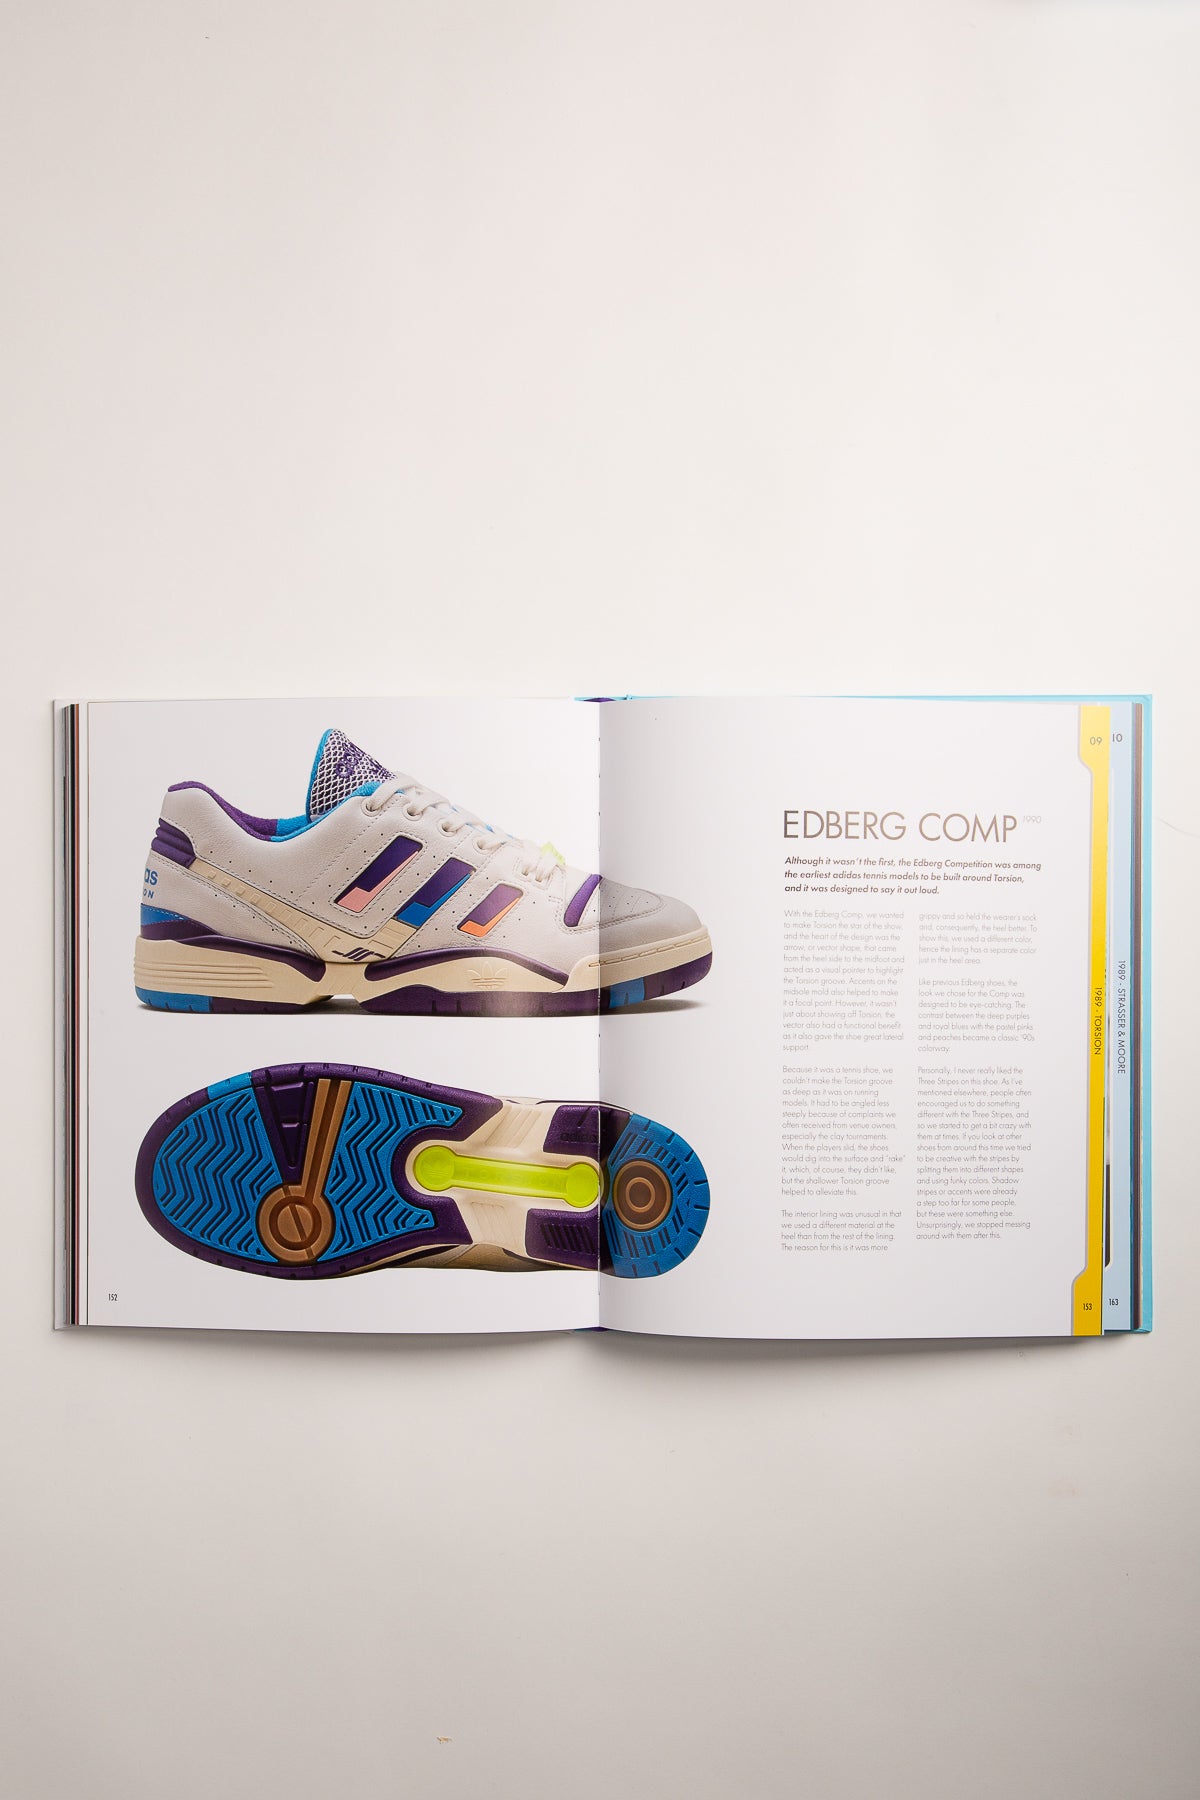 RIZZOLI | FROM SOUL TO SOLE: THE ADIDAS SNEAKERS OF JACQUES CHASSAING